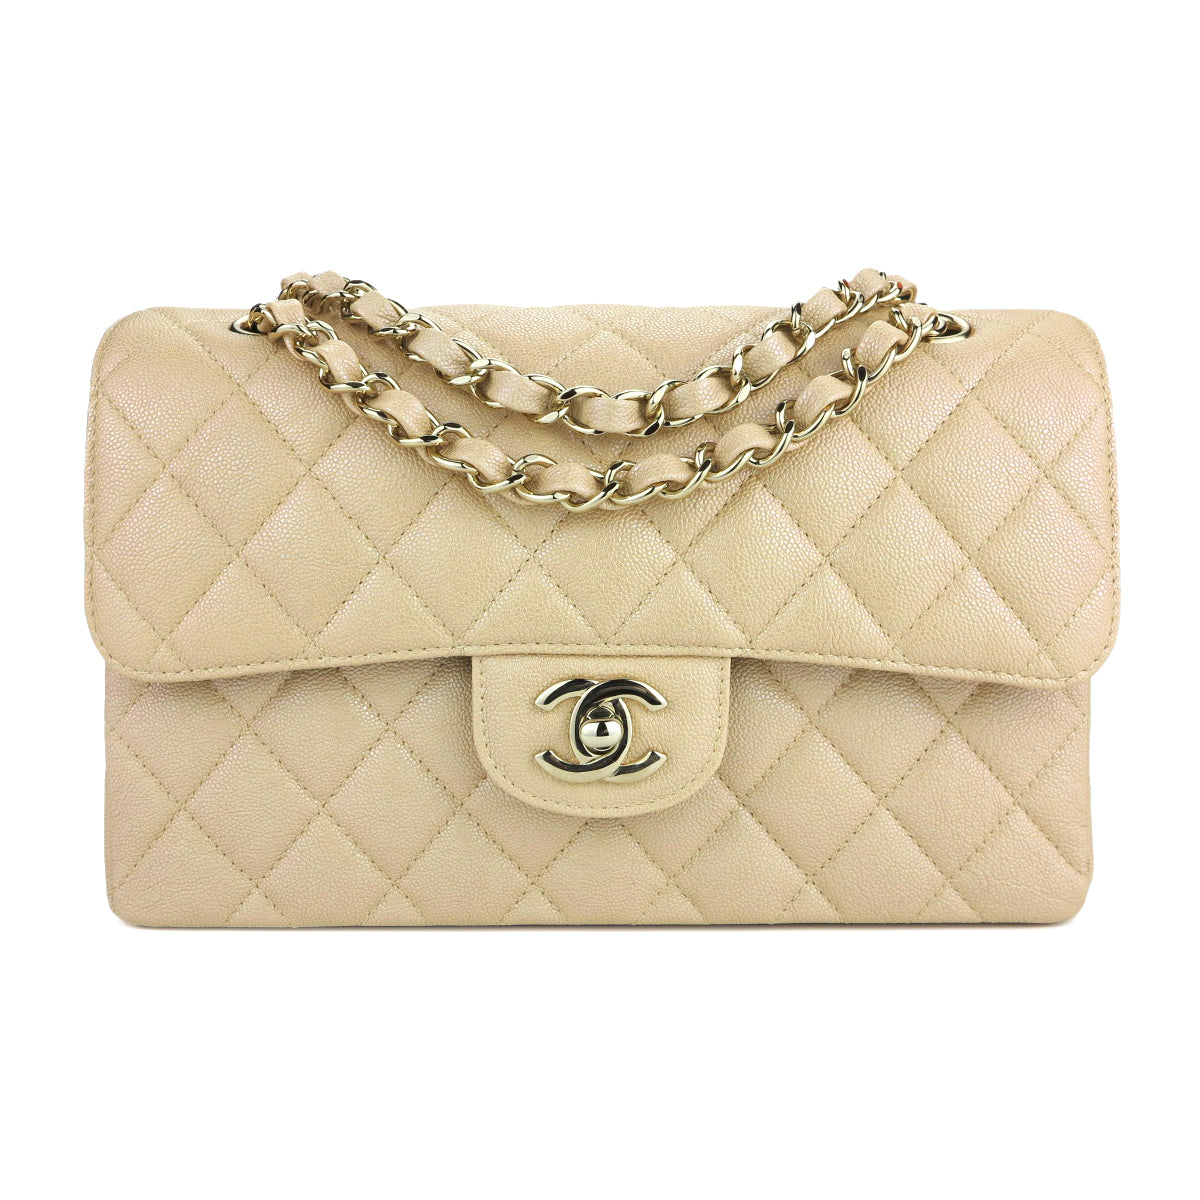 CHANEL Small Classic Double Flap Bag in Iridescent Beige Caviar